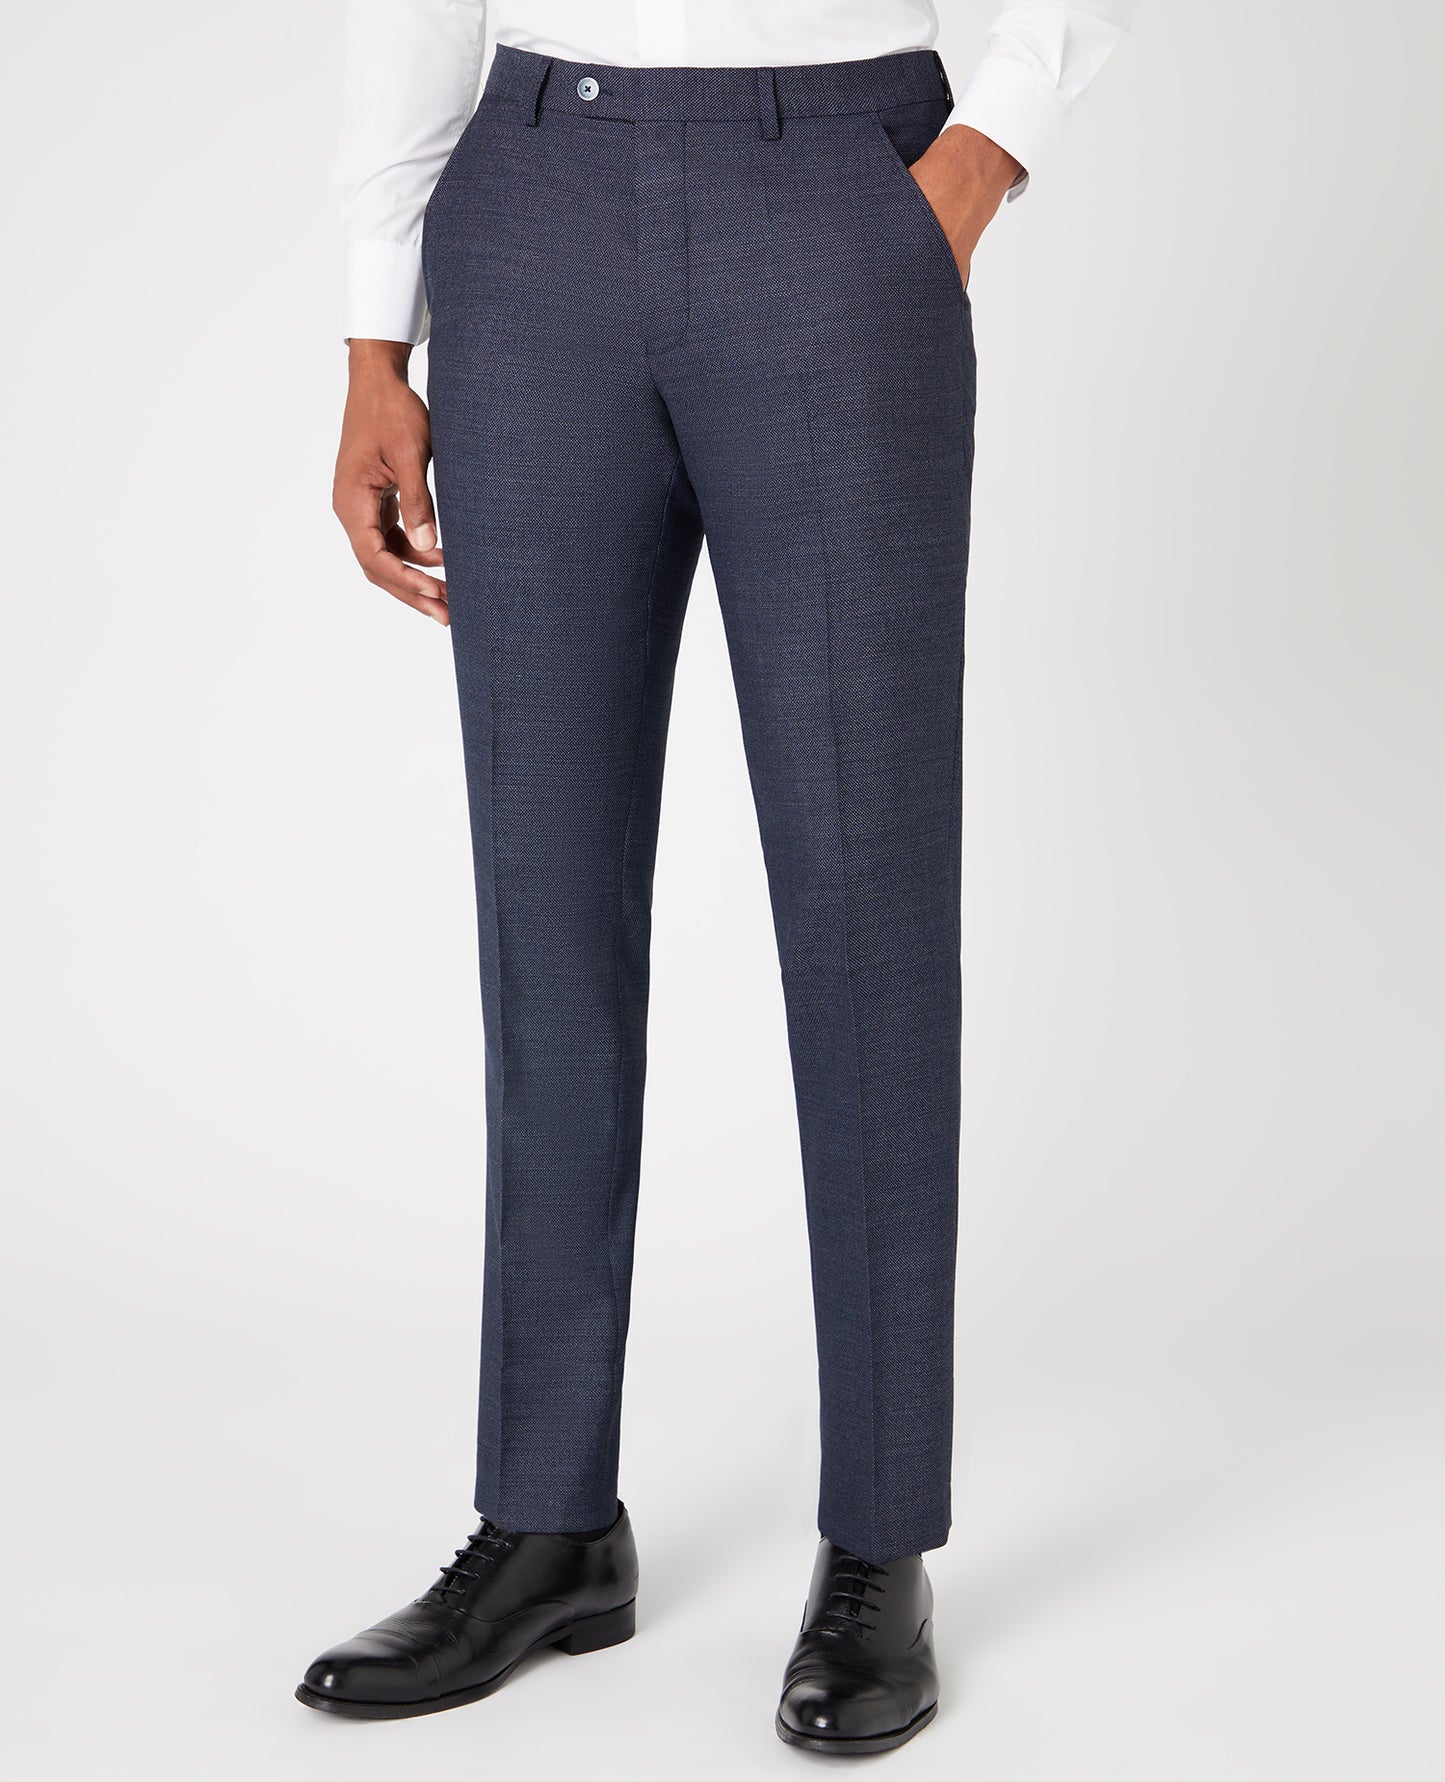 Remus Uomo Mario Self Pattern Mix and Match Suit Trousers